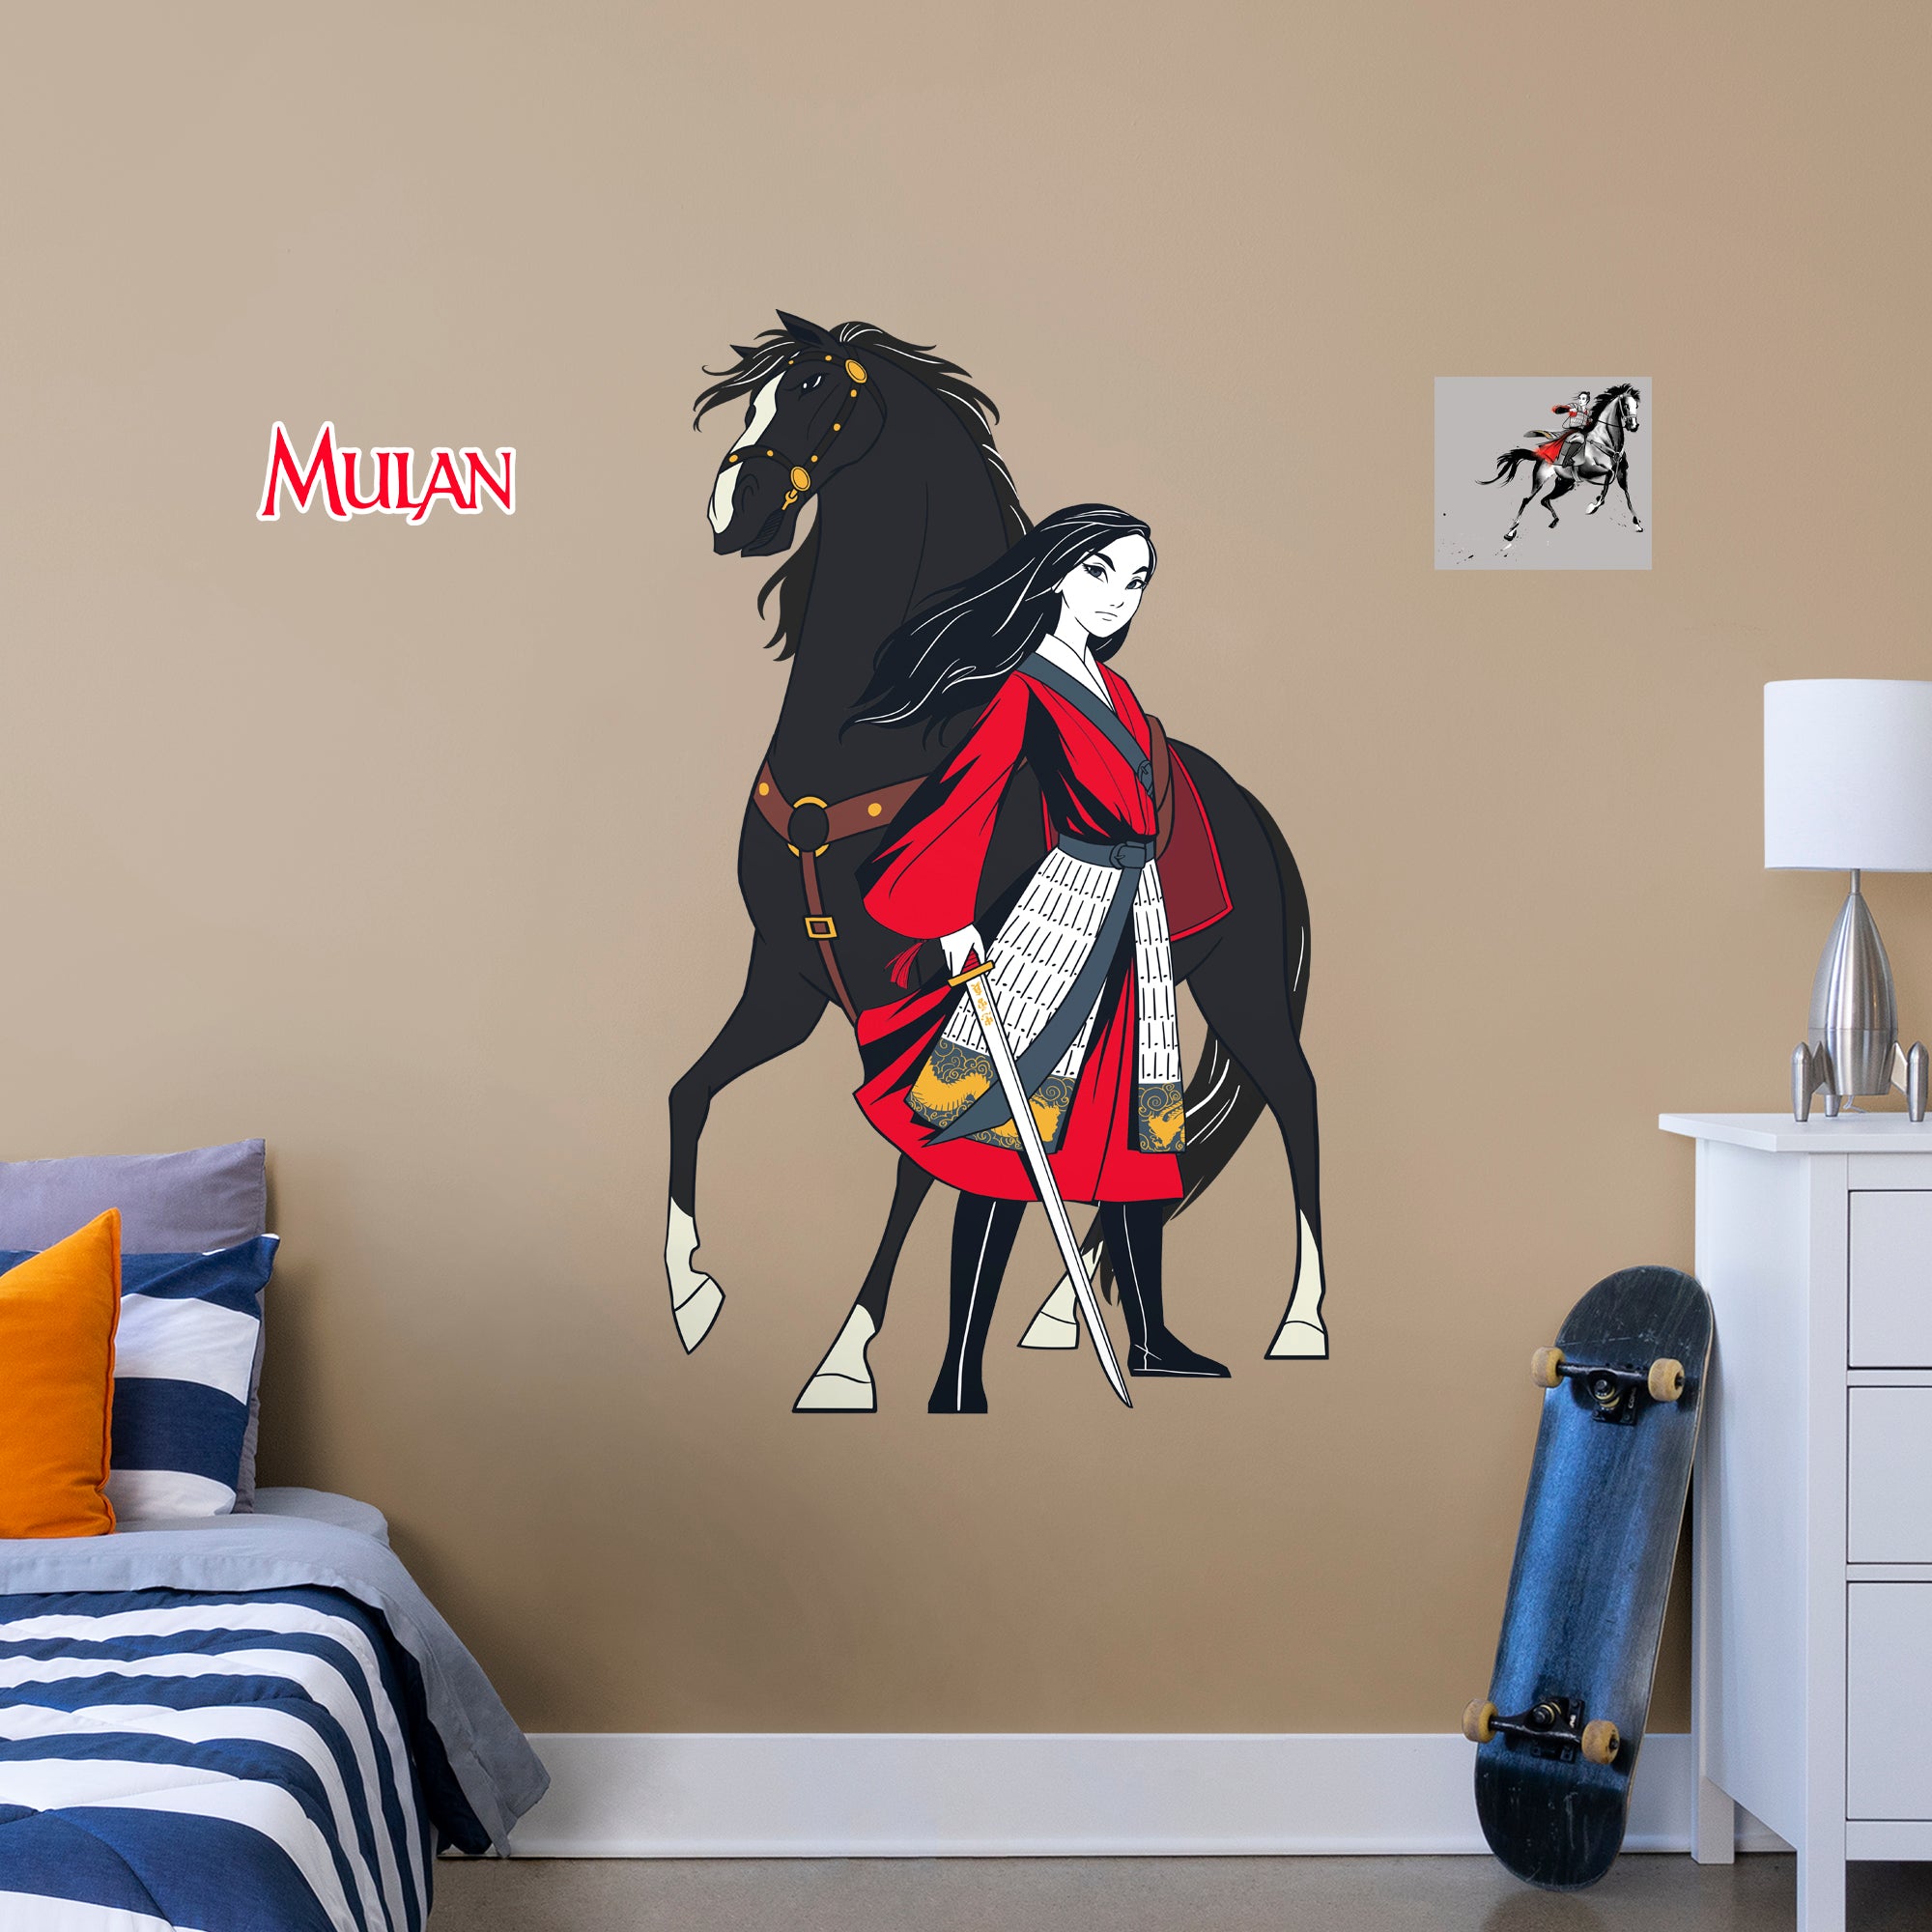 Mulan & Black Wind-Officially Licensed Disney Removable Wall Decal Giant Size + 2 Decals by Fathead | Vinyl